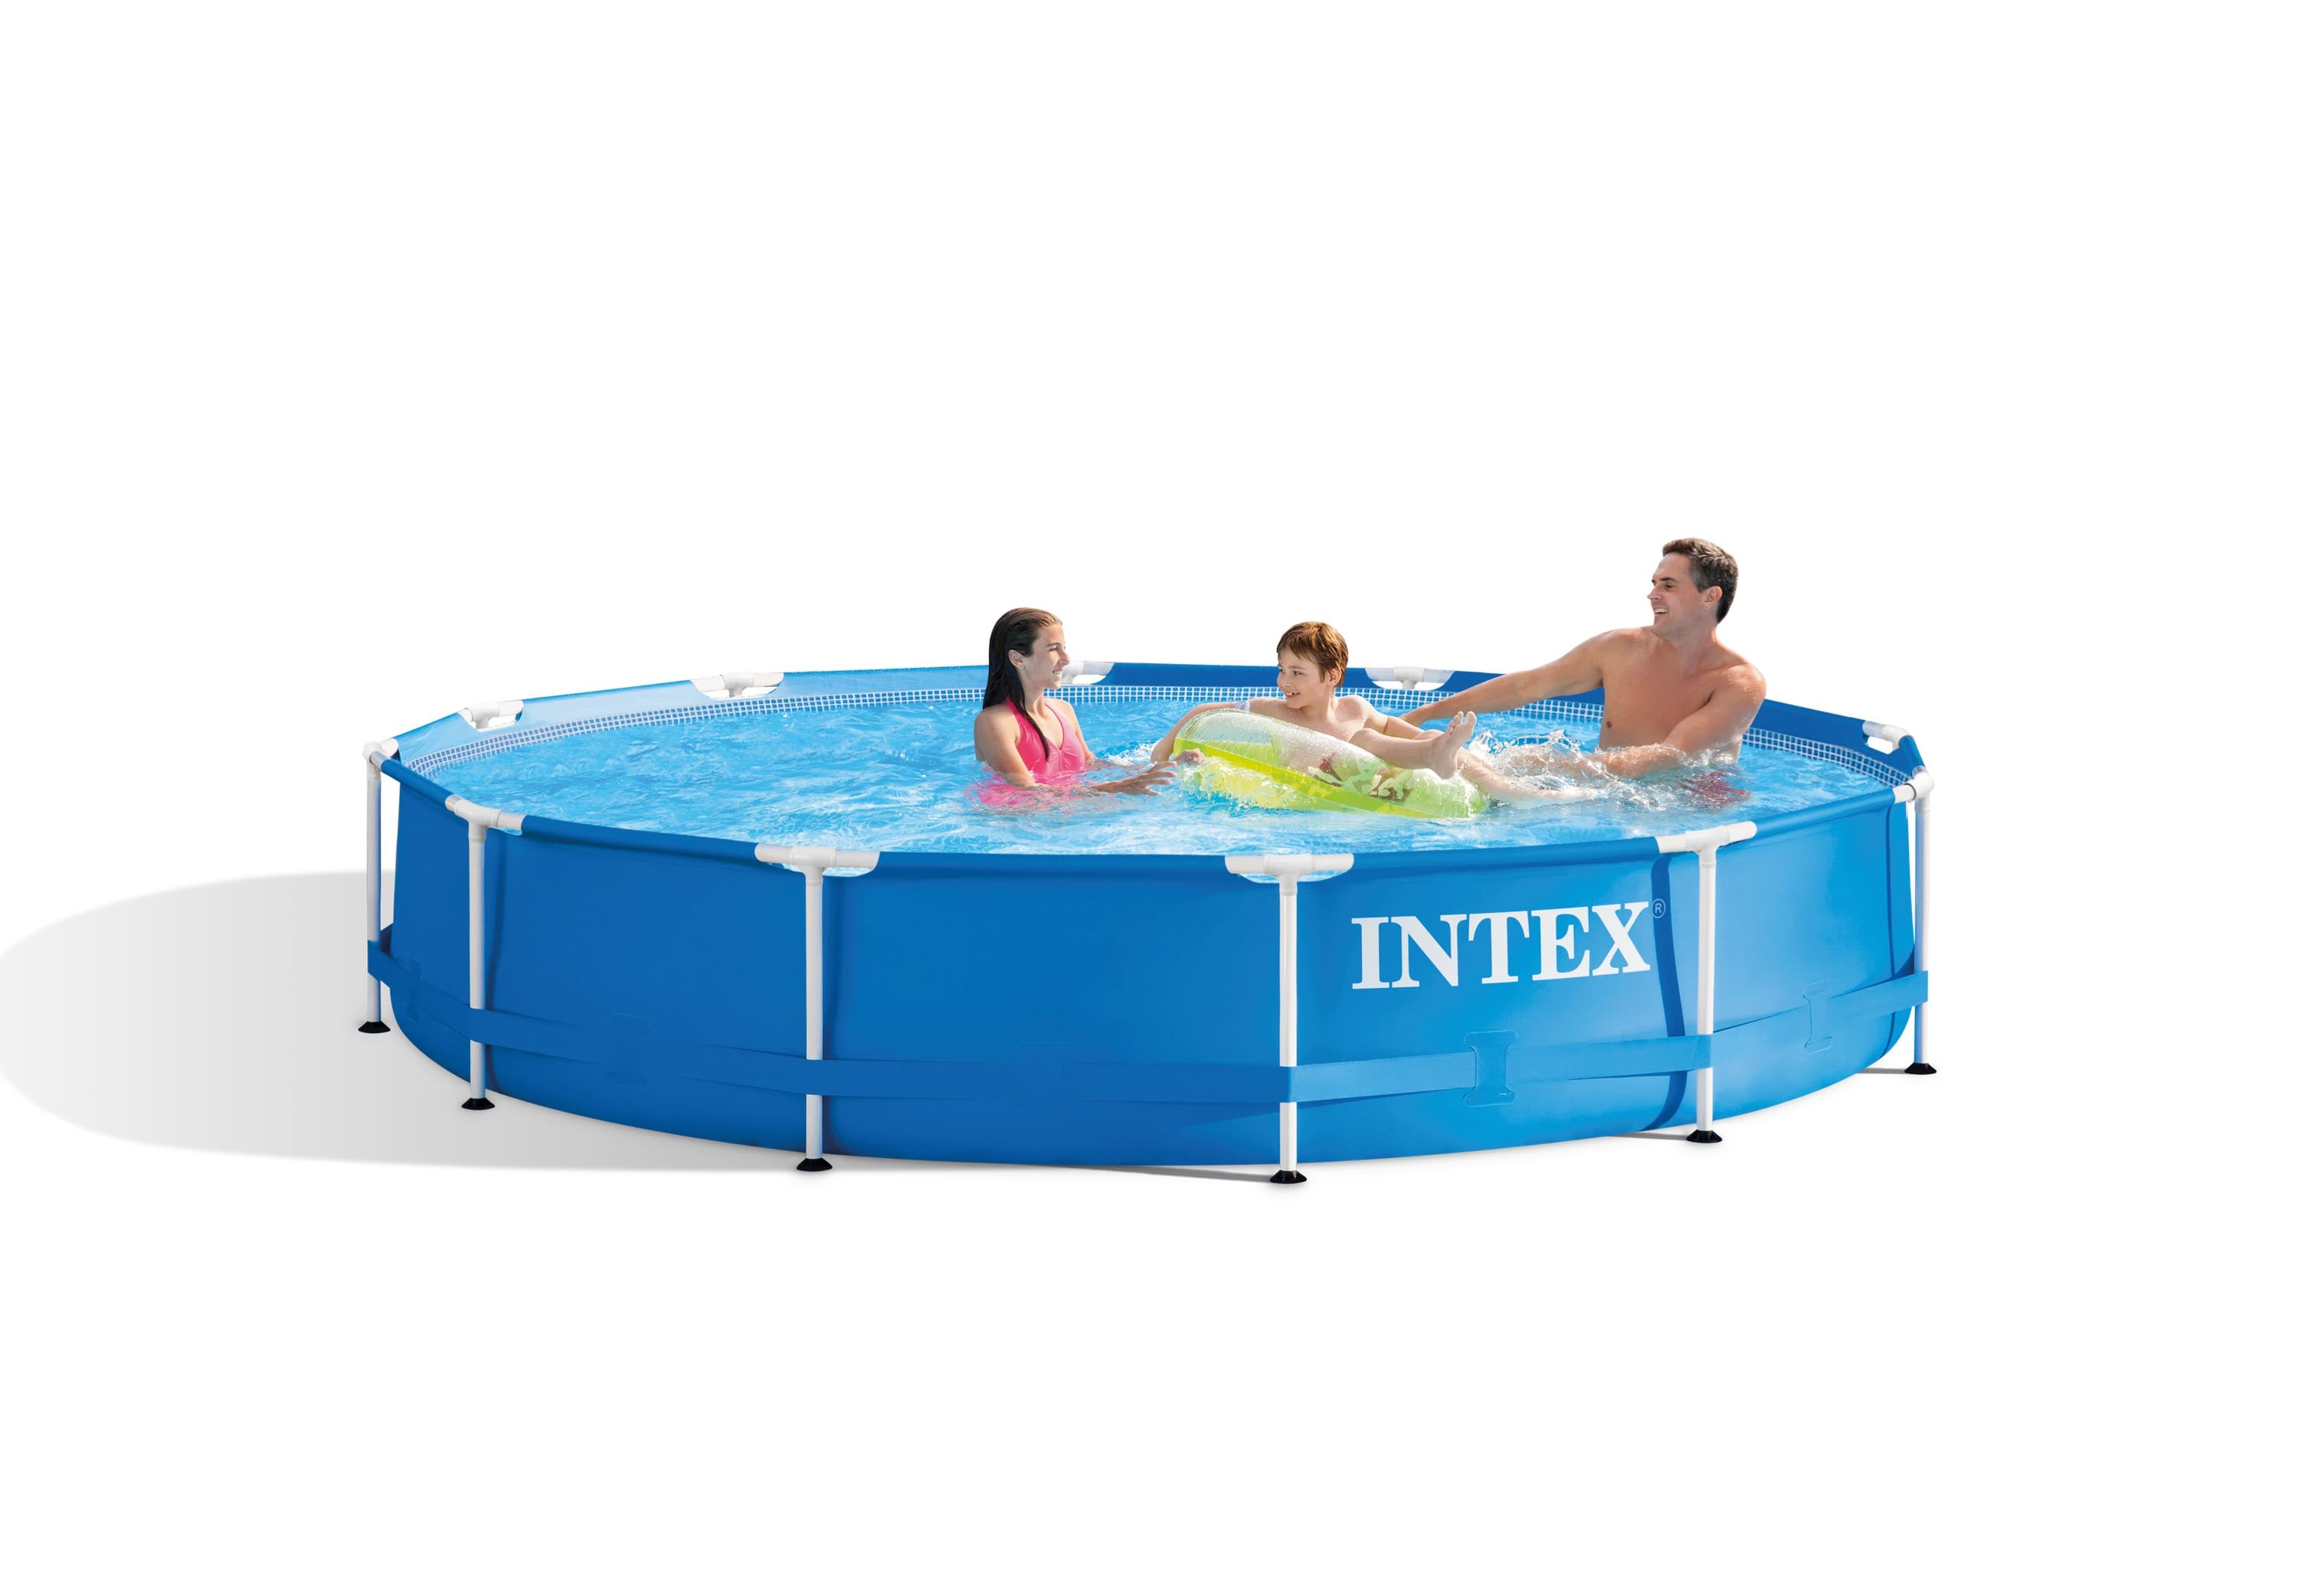 Intex 12-ft x 12-ft x 30-in Metal Frame Round Above-Ground Pool with Ground Cloth the Above-Ground department Lowes.com